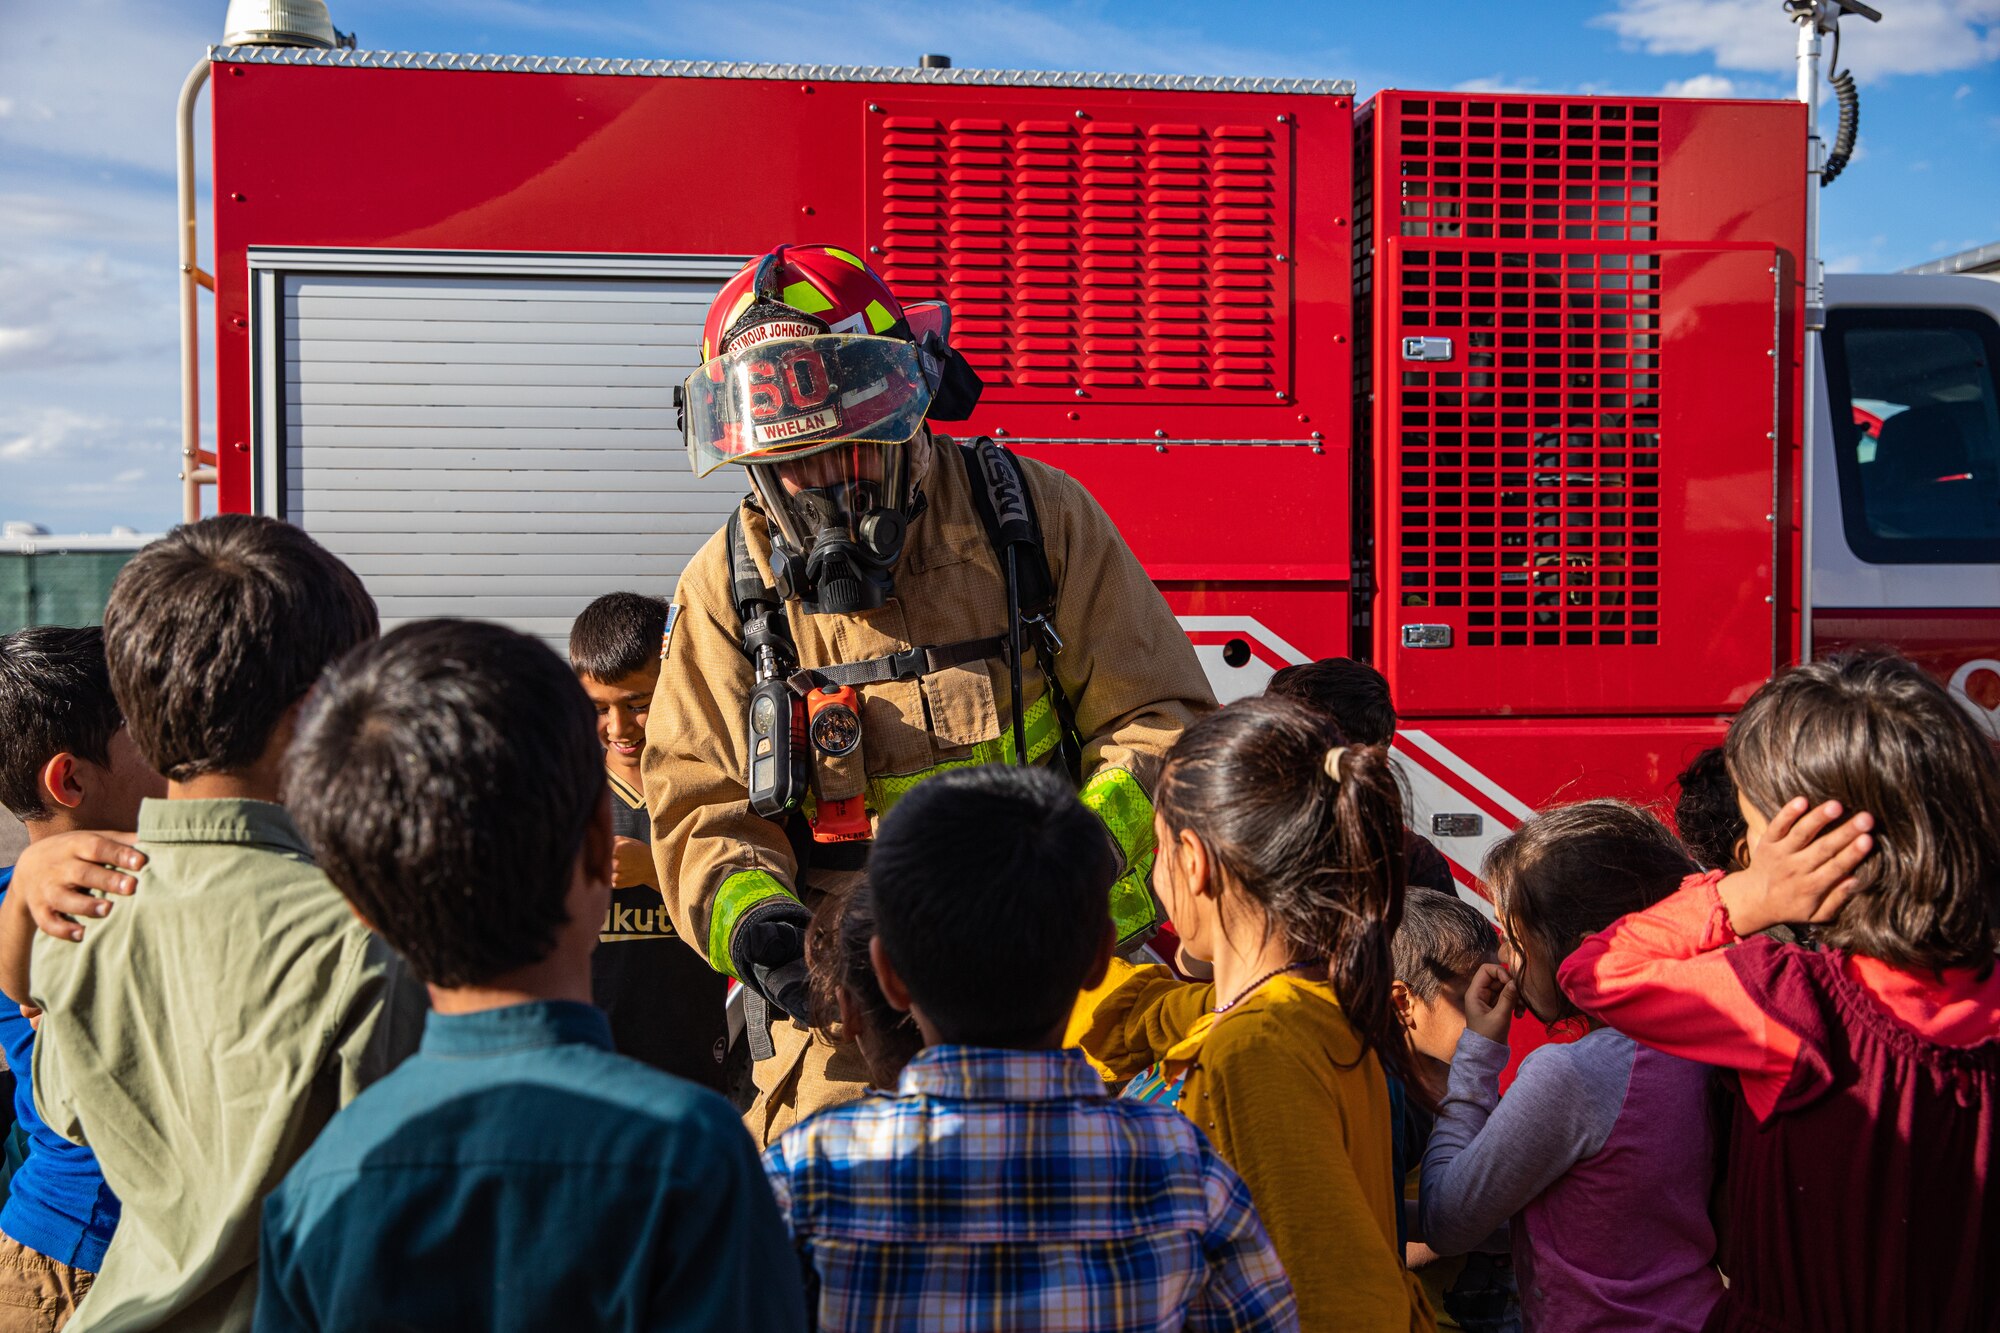 Tech. Sgt. Matt Whelan, Task Force-Holloman firefighter deployed from Seymour Johnson Air Force Base, North Carolina, speaks to Afghan children during a safety class at Aman Omid Village on Holloman Air Force Base, New Mexico, Oct. 11, 2021. The Department of Defense, through U.S. Northern Command, and in support of the Department of Homeland Security, is providing transportation, temporary housing, medical screening, and general support for at least 50,000 Afghan evacuees at suitable facilities, in permanent or temporary structures, as quickly as possible. This initiative provides Afghan personnel essential support at secure locations outside Afghanistan. (U.S. Army photo by Pfc. Anthony Sanchez)